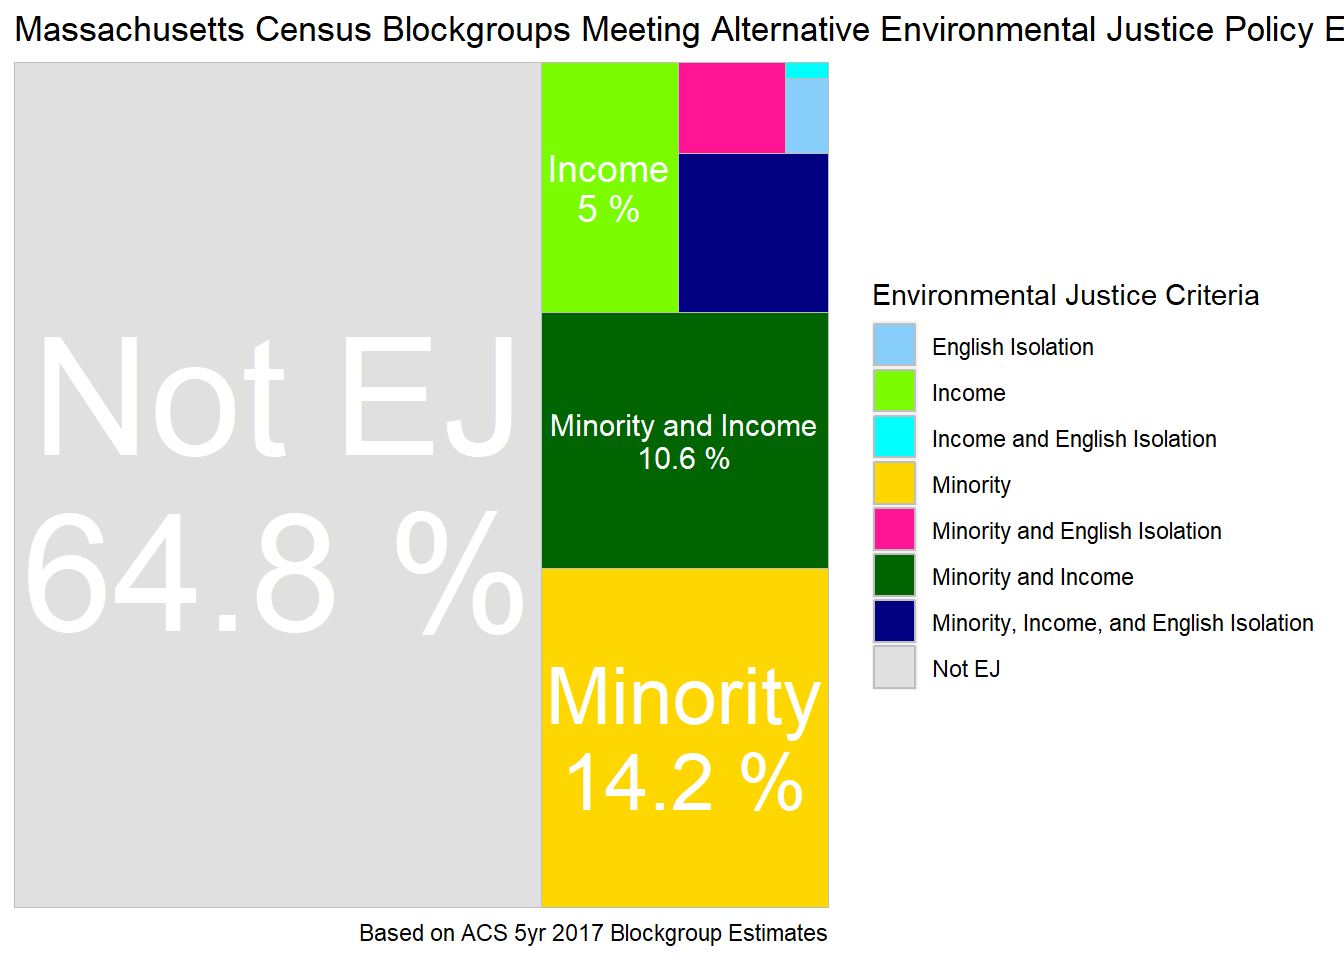 Tree map of block groups classified as environmental justice by Alternative Environmental Justice Policy E - Modify Minority Criteria by Income.